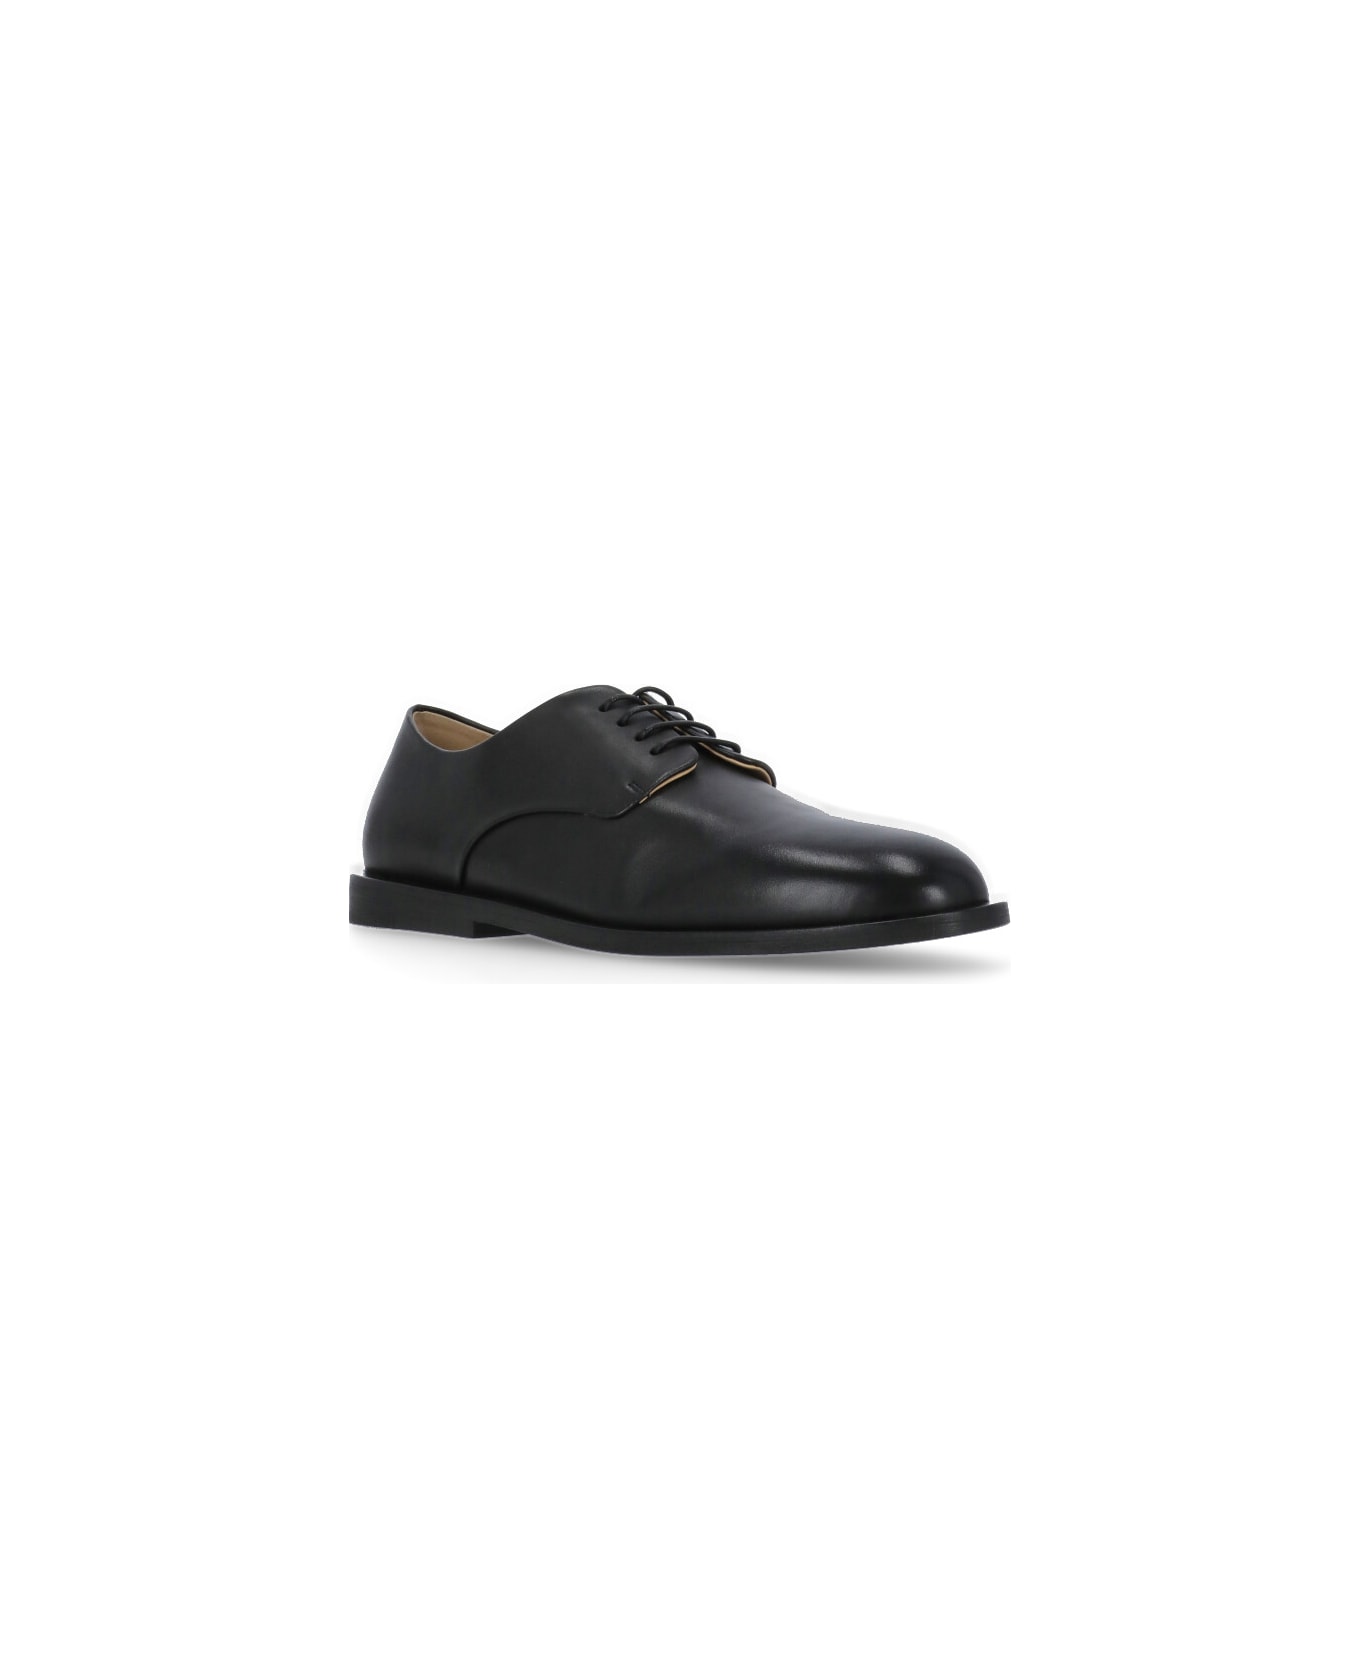 Marsell Mando Derdy Lace-up Shoes - Black フラットシューズ